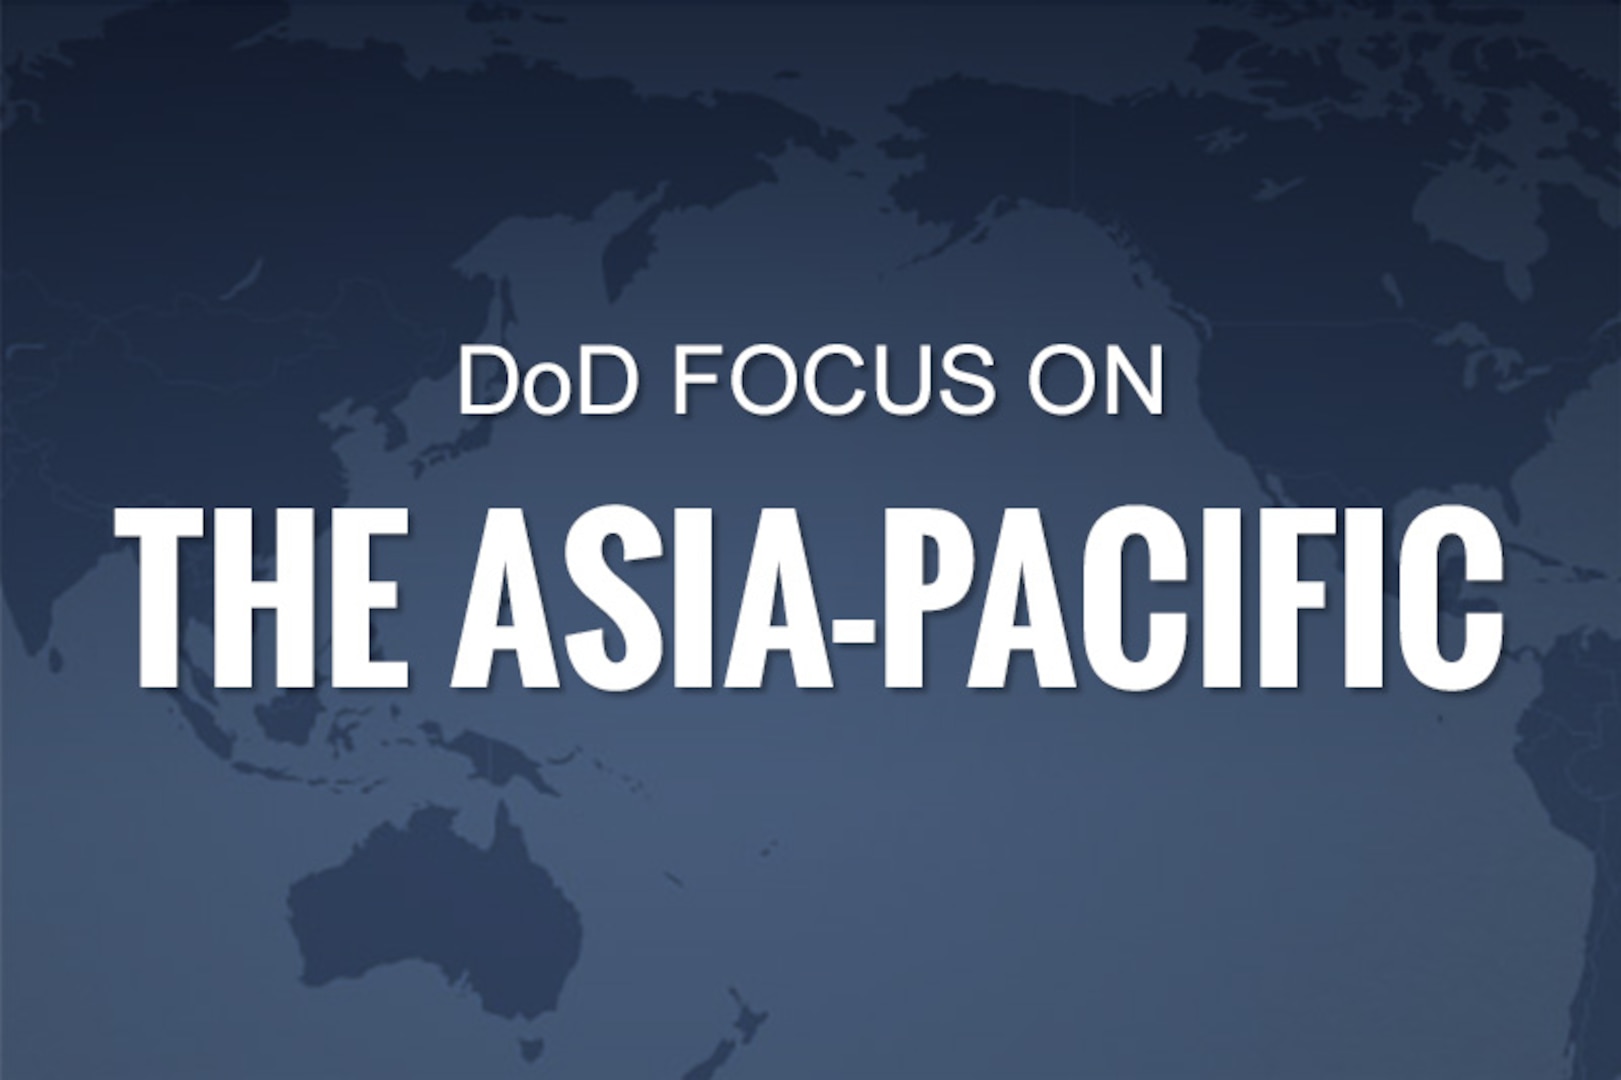 Defense leaders remain focused on efforts to strengthen relationships and modernize U.S. alliances in the Asia-Pacific region as a priority for 21st century security interests and sustaining U.S. global leadership. 